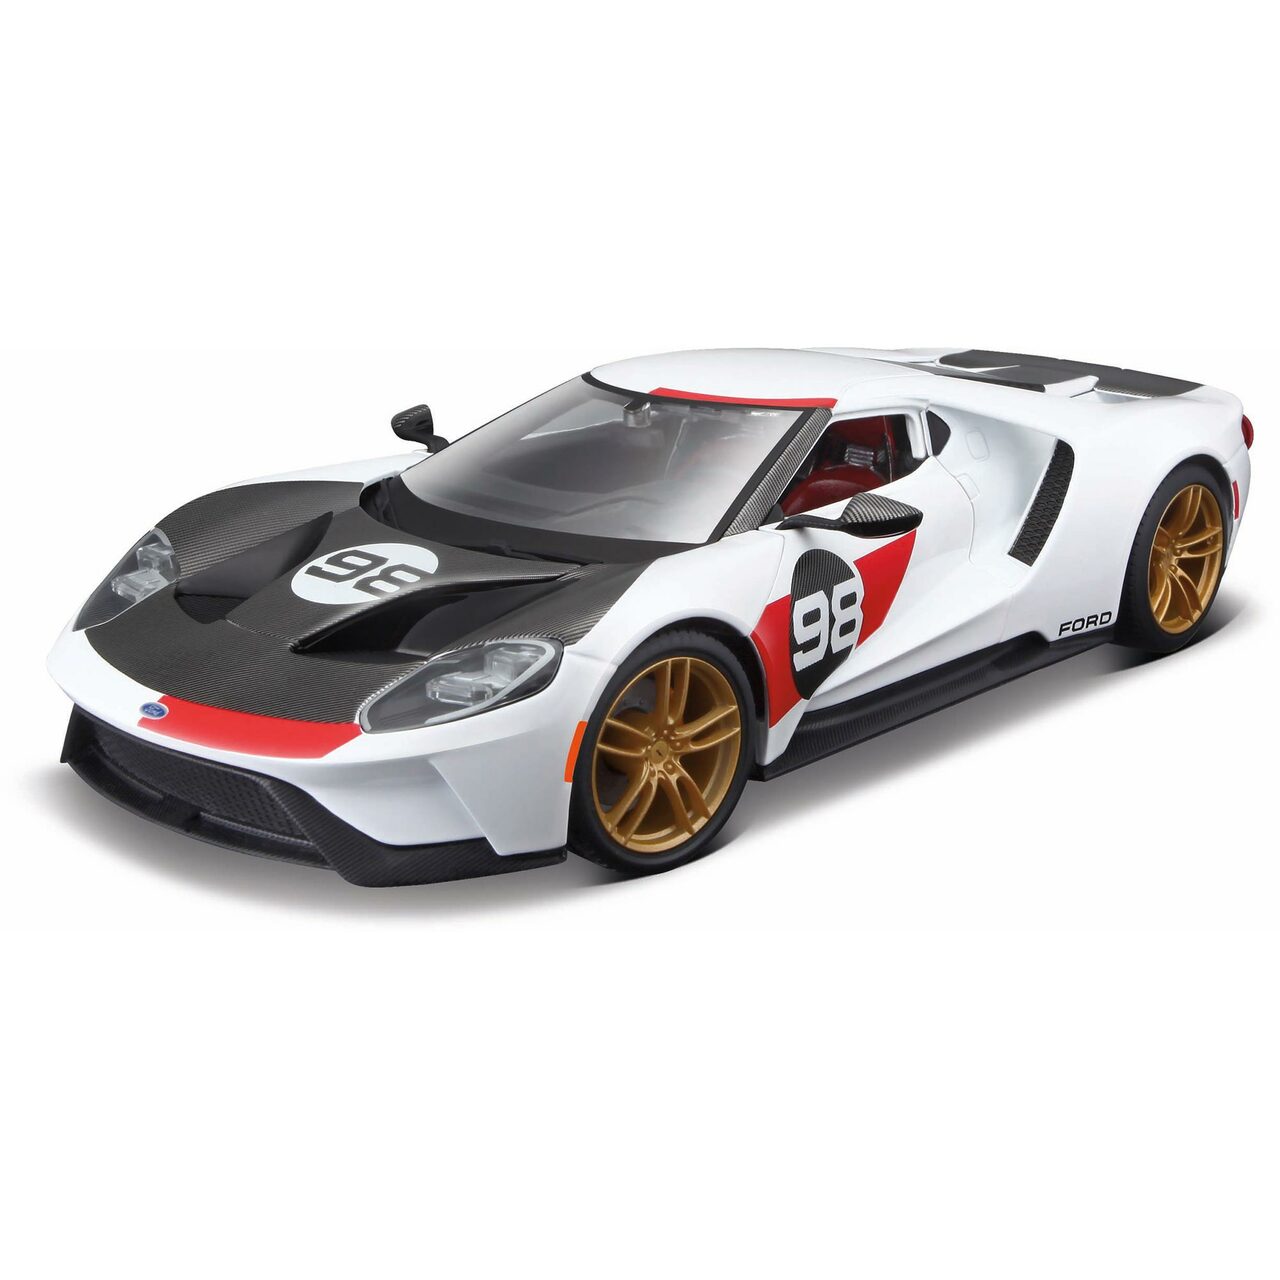 Игрушечная машинка Maisto Ford GT Heritage 2021, 1:18, белая 31390 maisto 1 24 new modified version 1967 ford mustang gt modified alloy car model collection gift toy